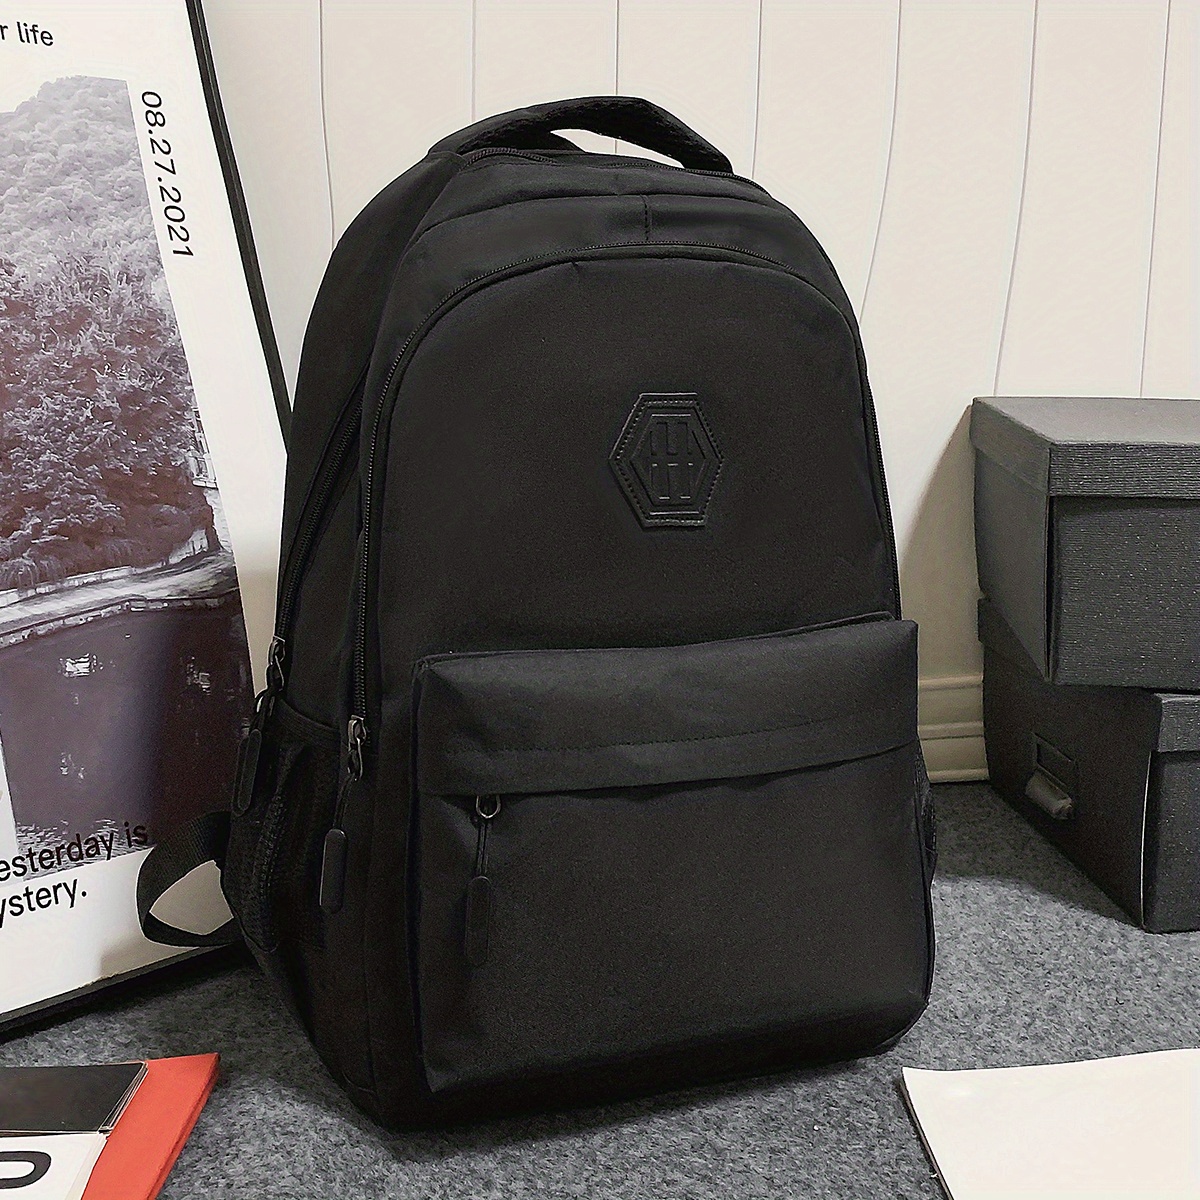 OW COLLEGE BACKPACK in black